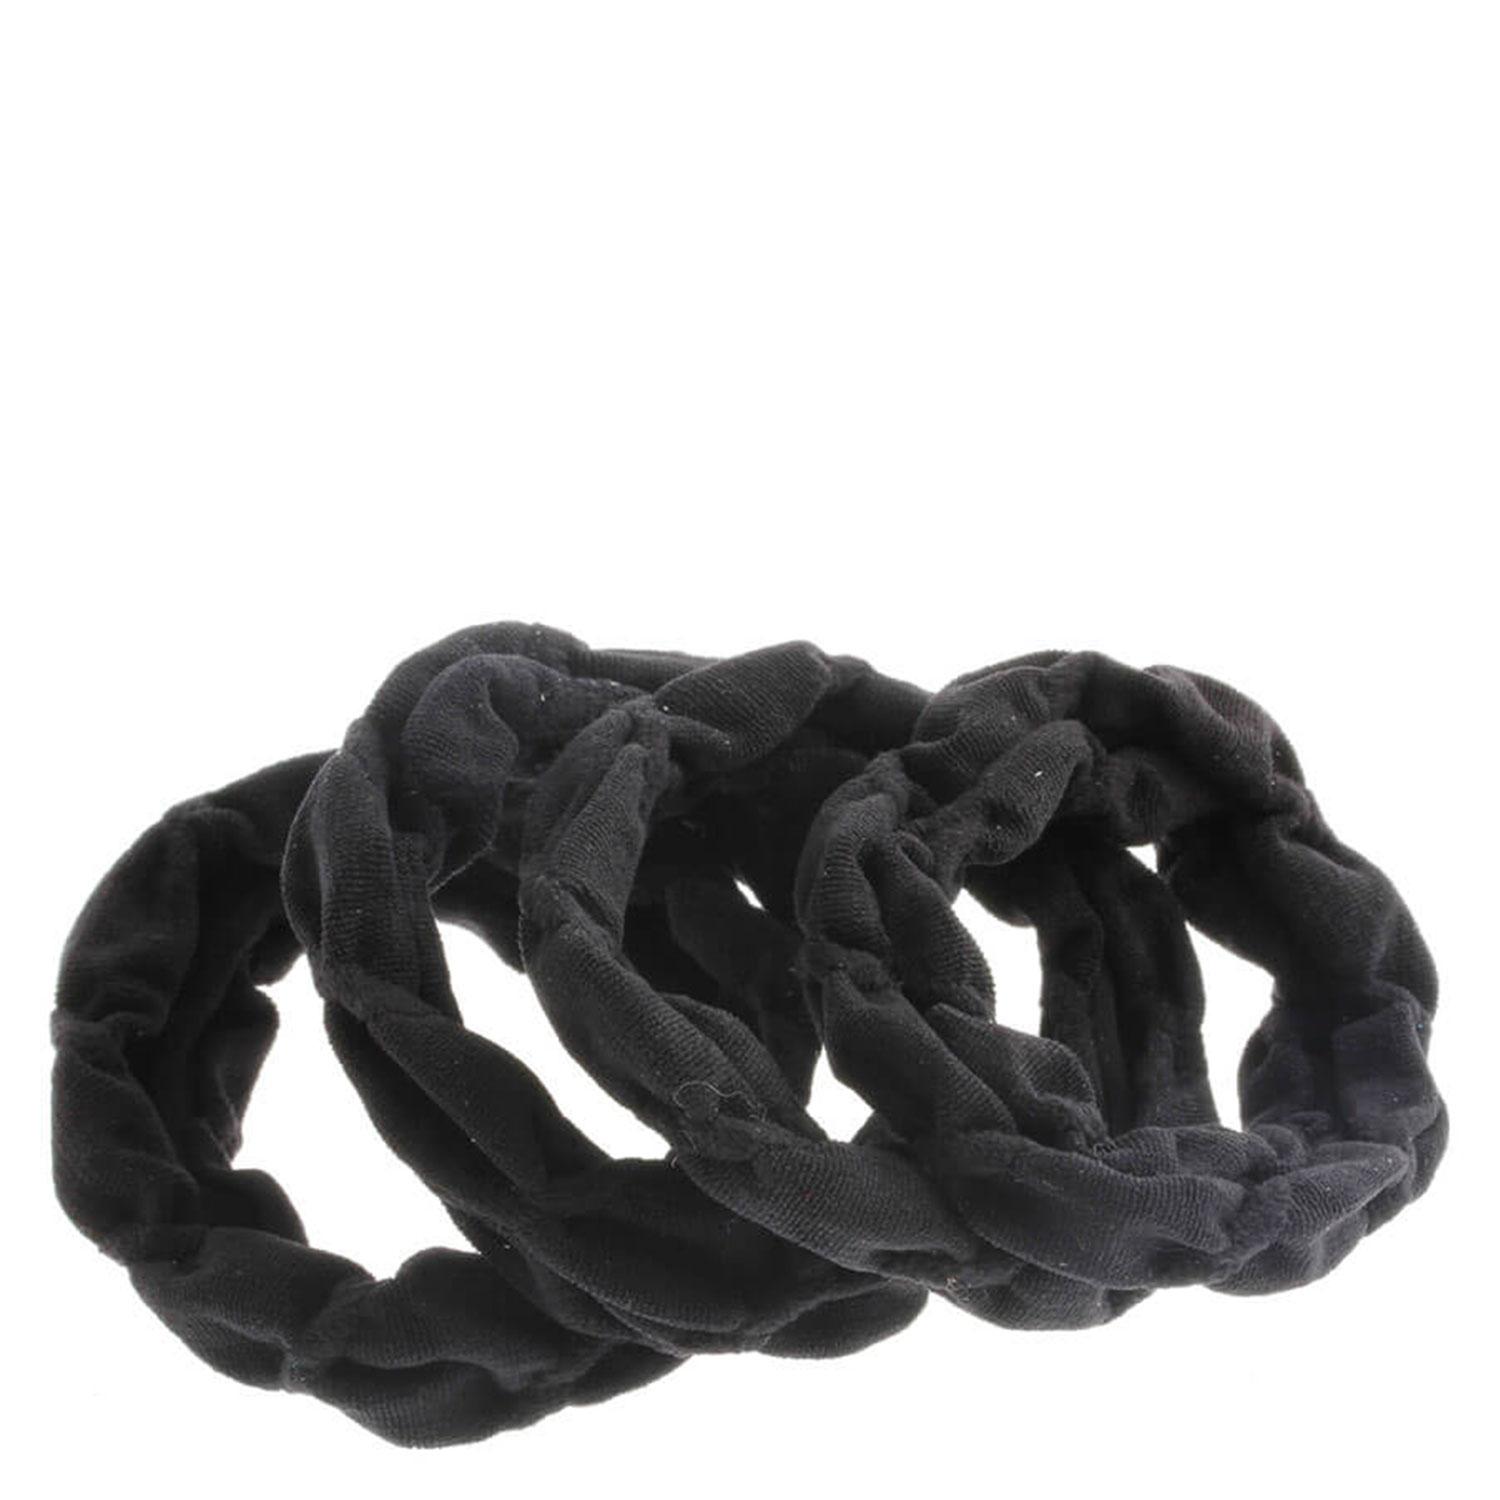 DailyGO - Elastic supersoft black curved